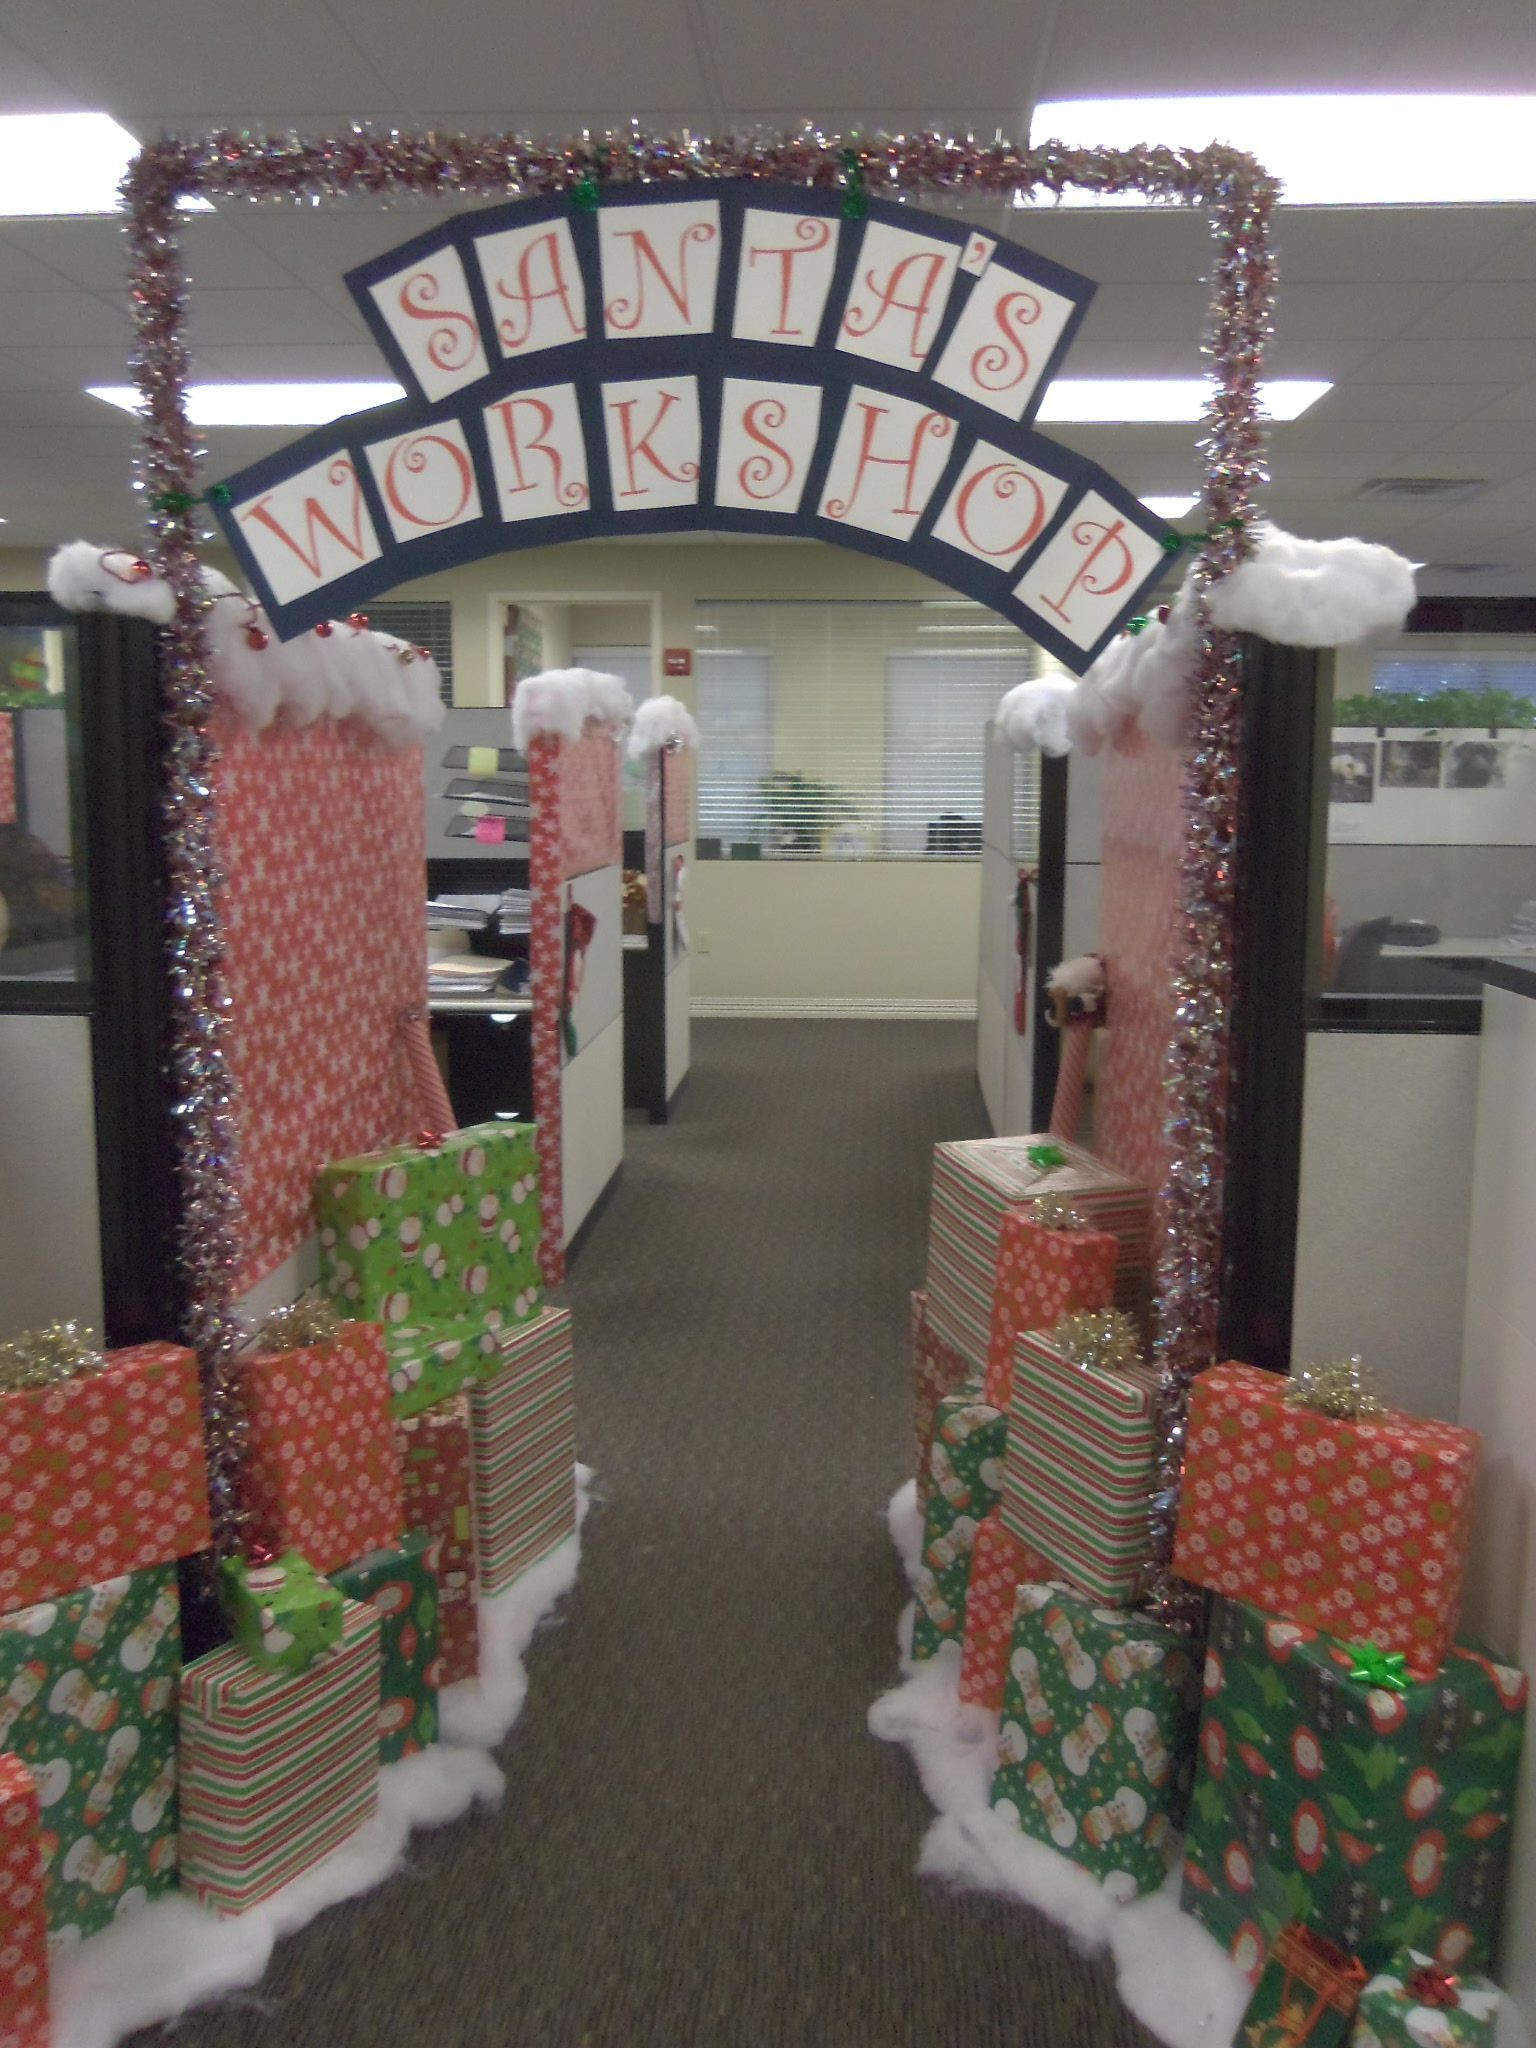 Office Holiday Party Decorating Ideas
 Christmas decorations can boost morale at the office